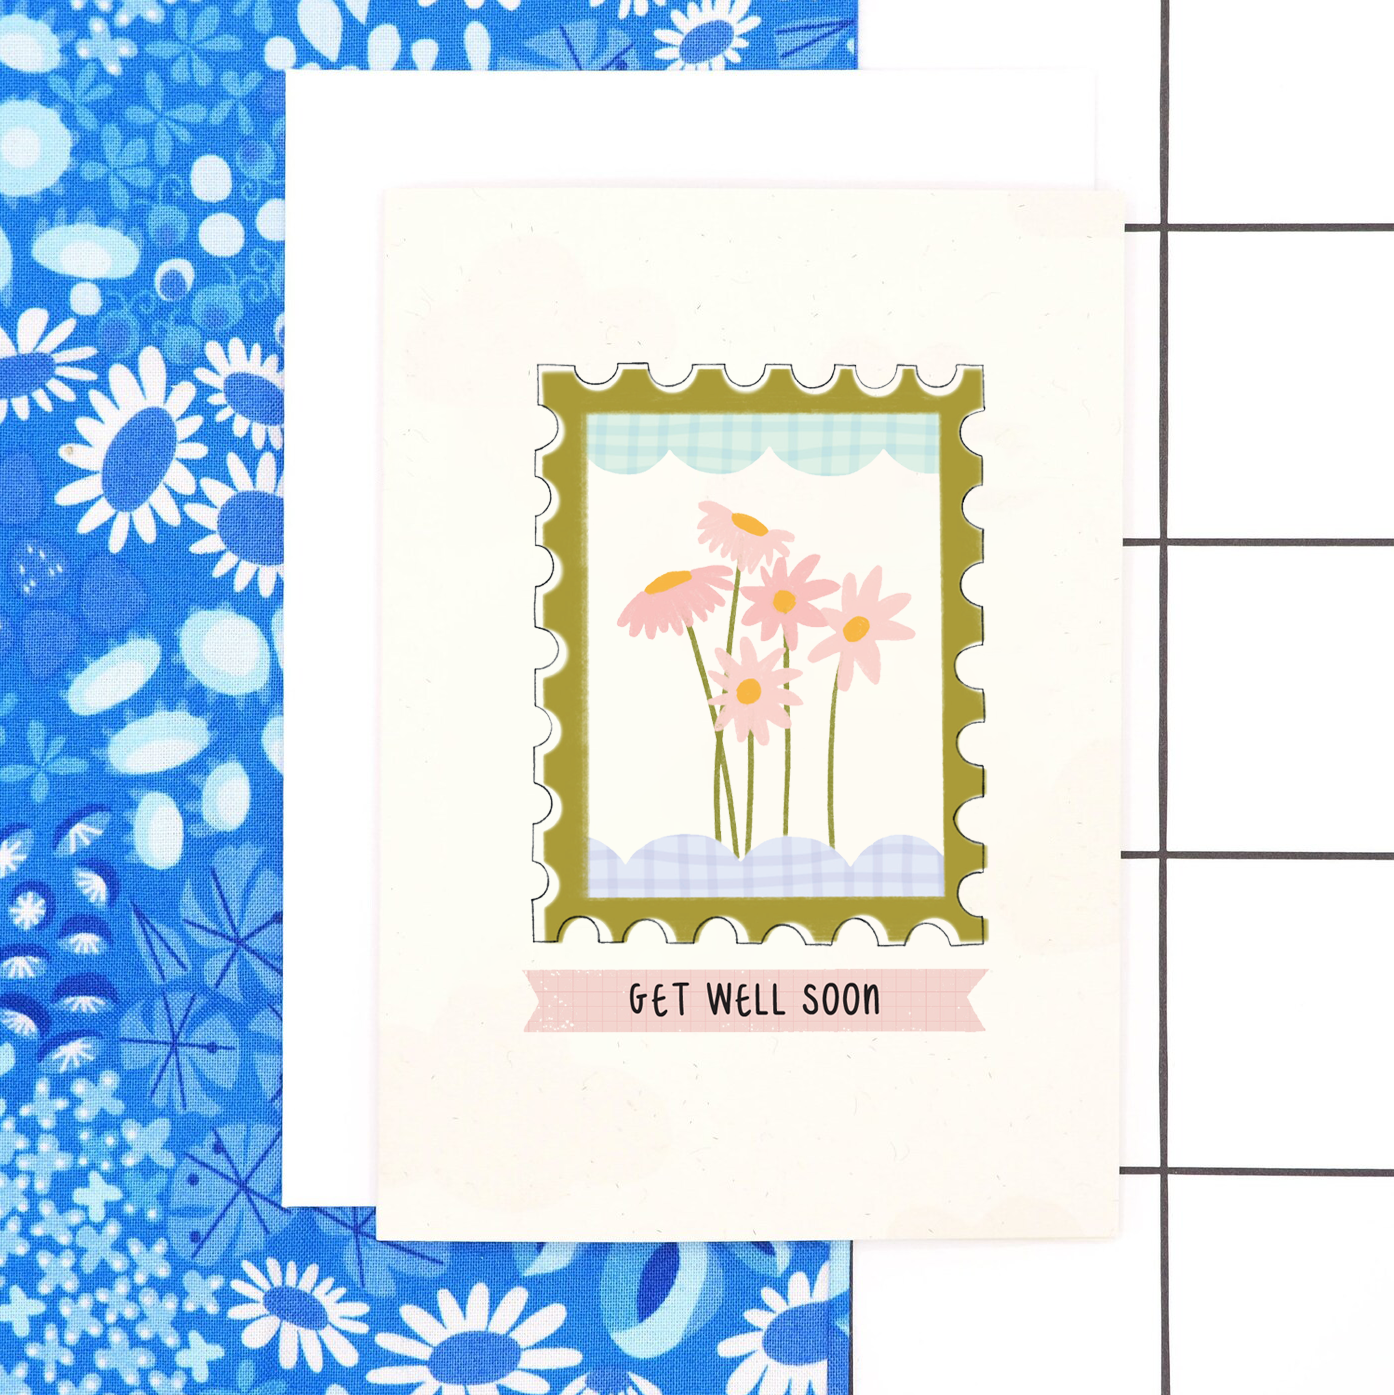 Get Well Soon 'Floral Stamp' Card